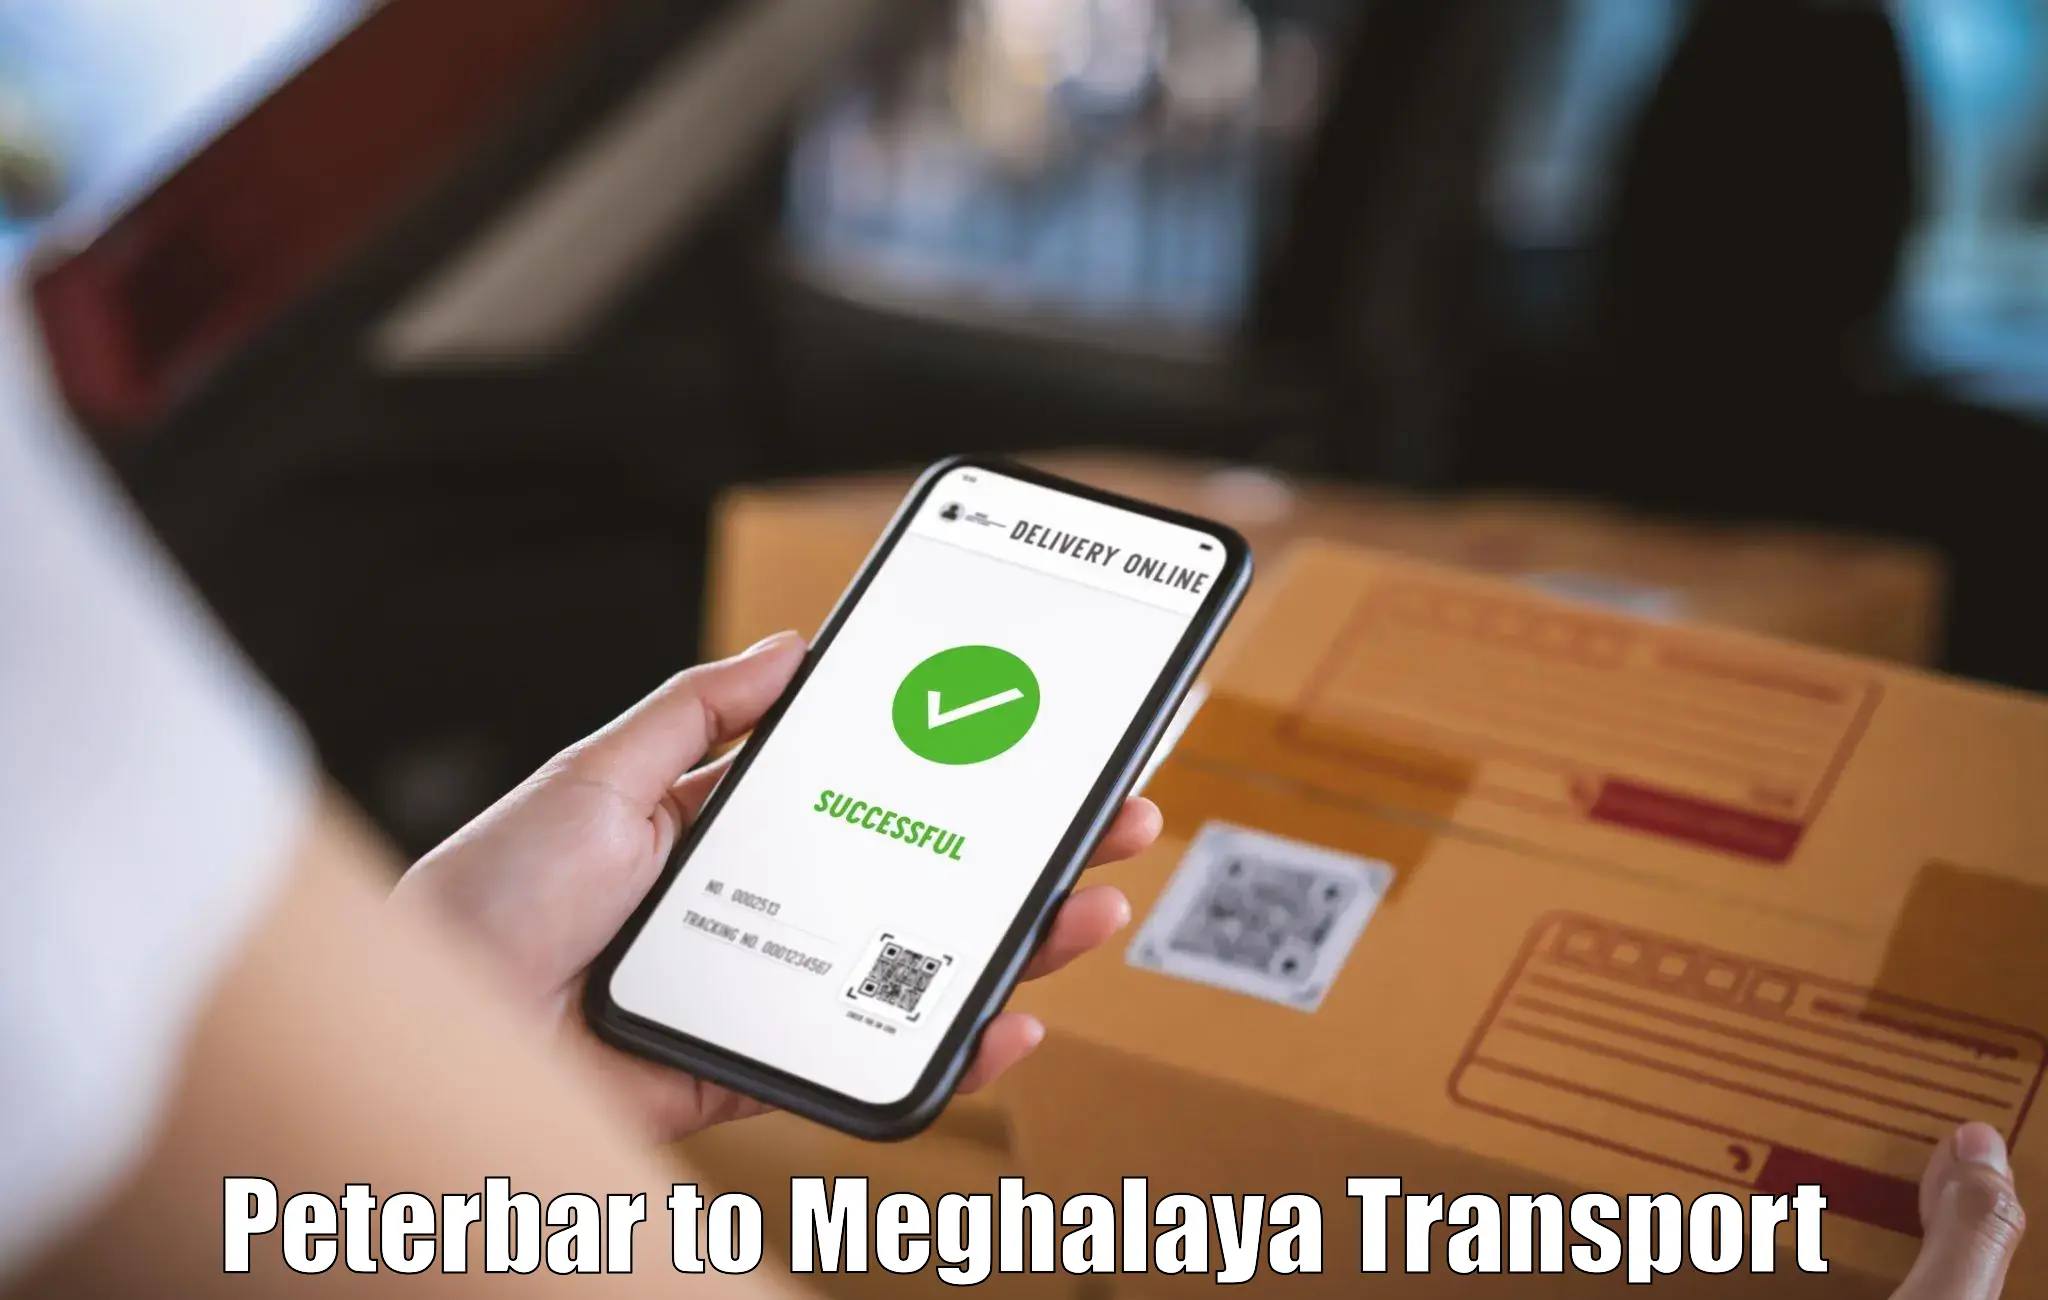 Delivery service Peterbar to Meghalaya